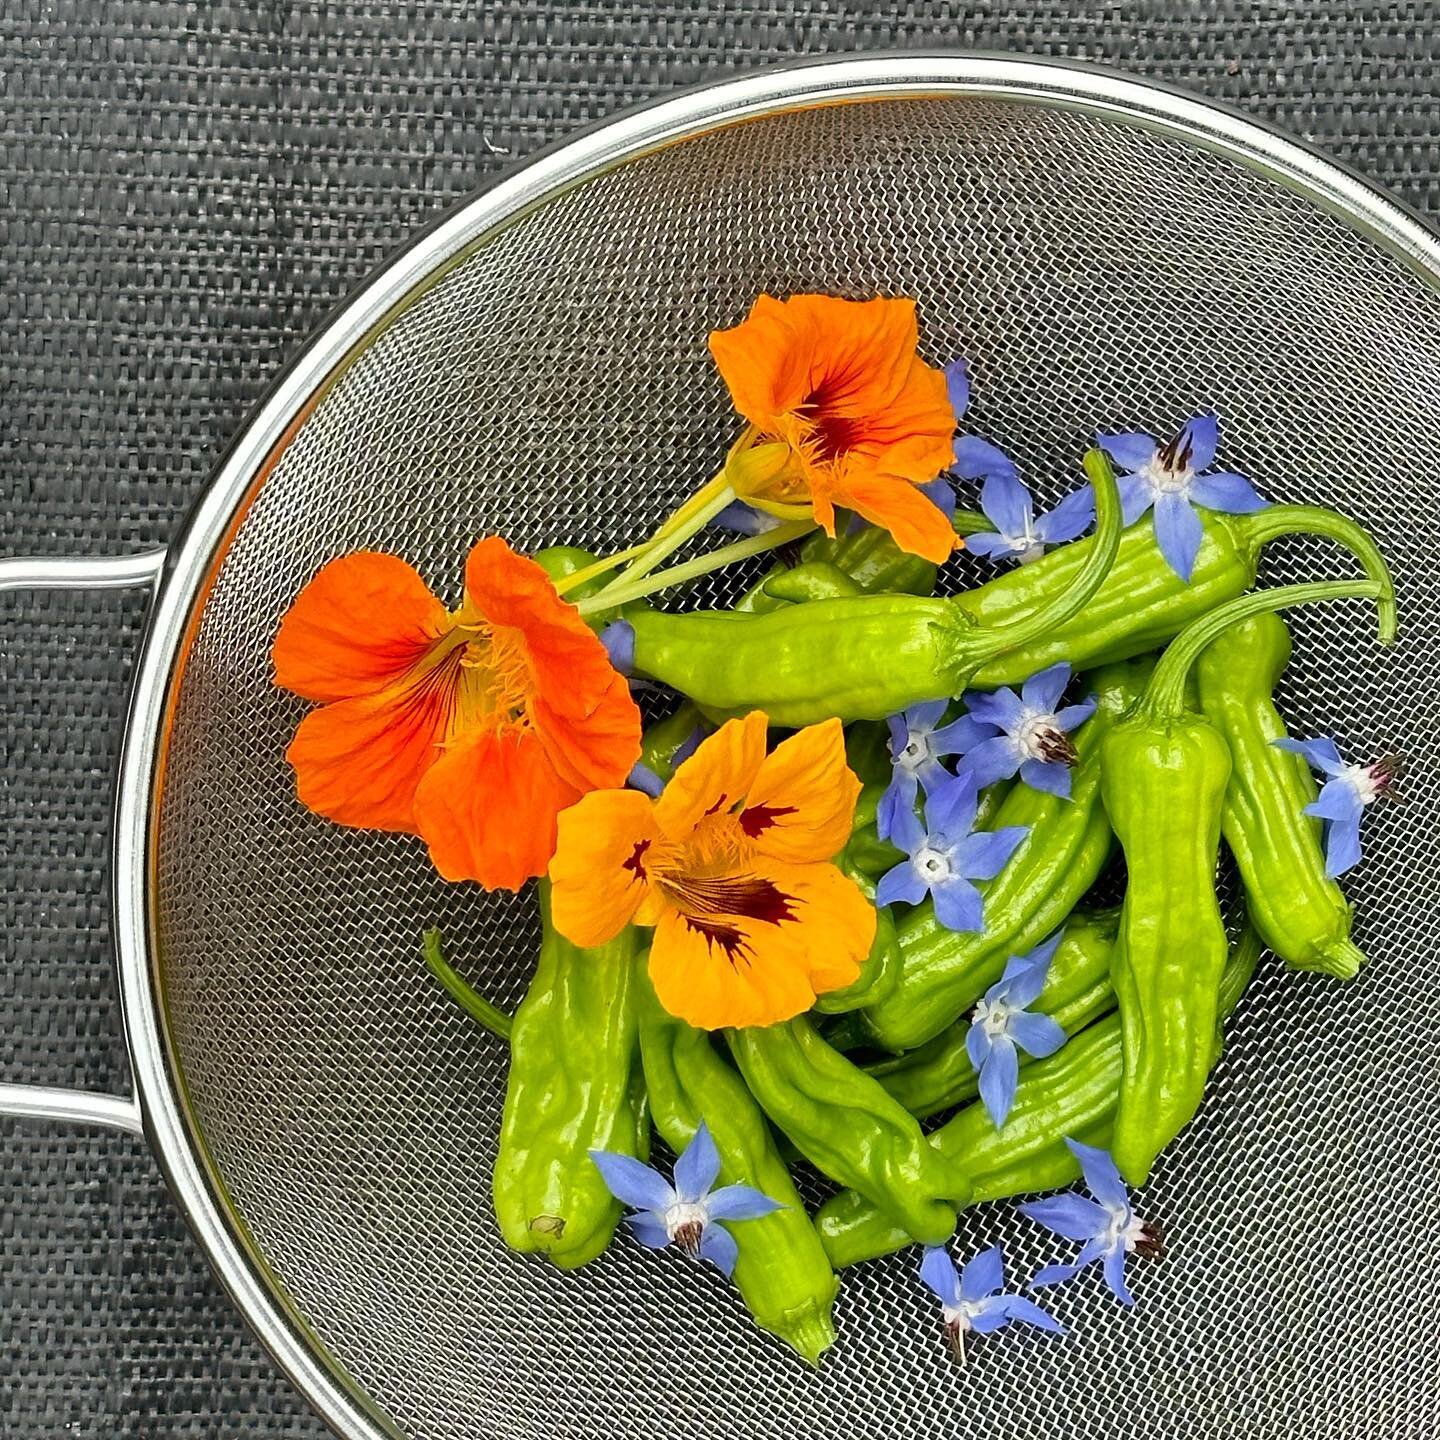 A little lunchtime harvest from the garden of shishito peppers and edible flowers. 🥰

I grow nasturtium and borage as dual-purpose veggie garden crops! Not only are they truly delicious, but they each serve a purpose to keep my garden healthy. 

Nas